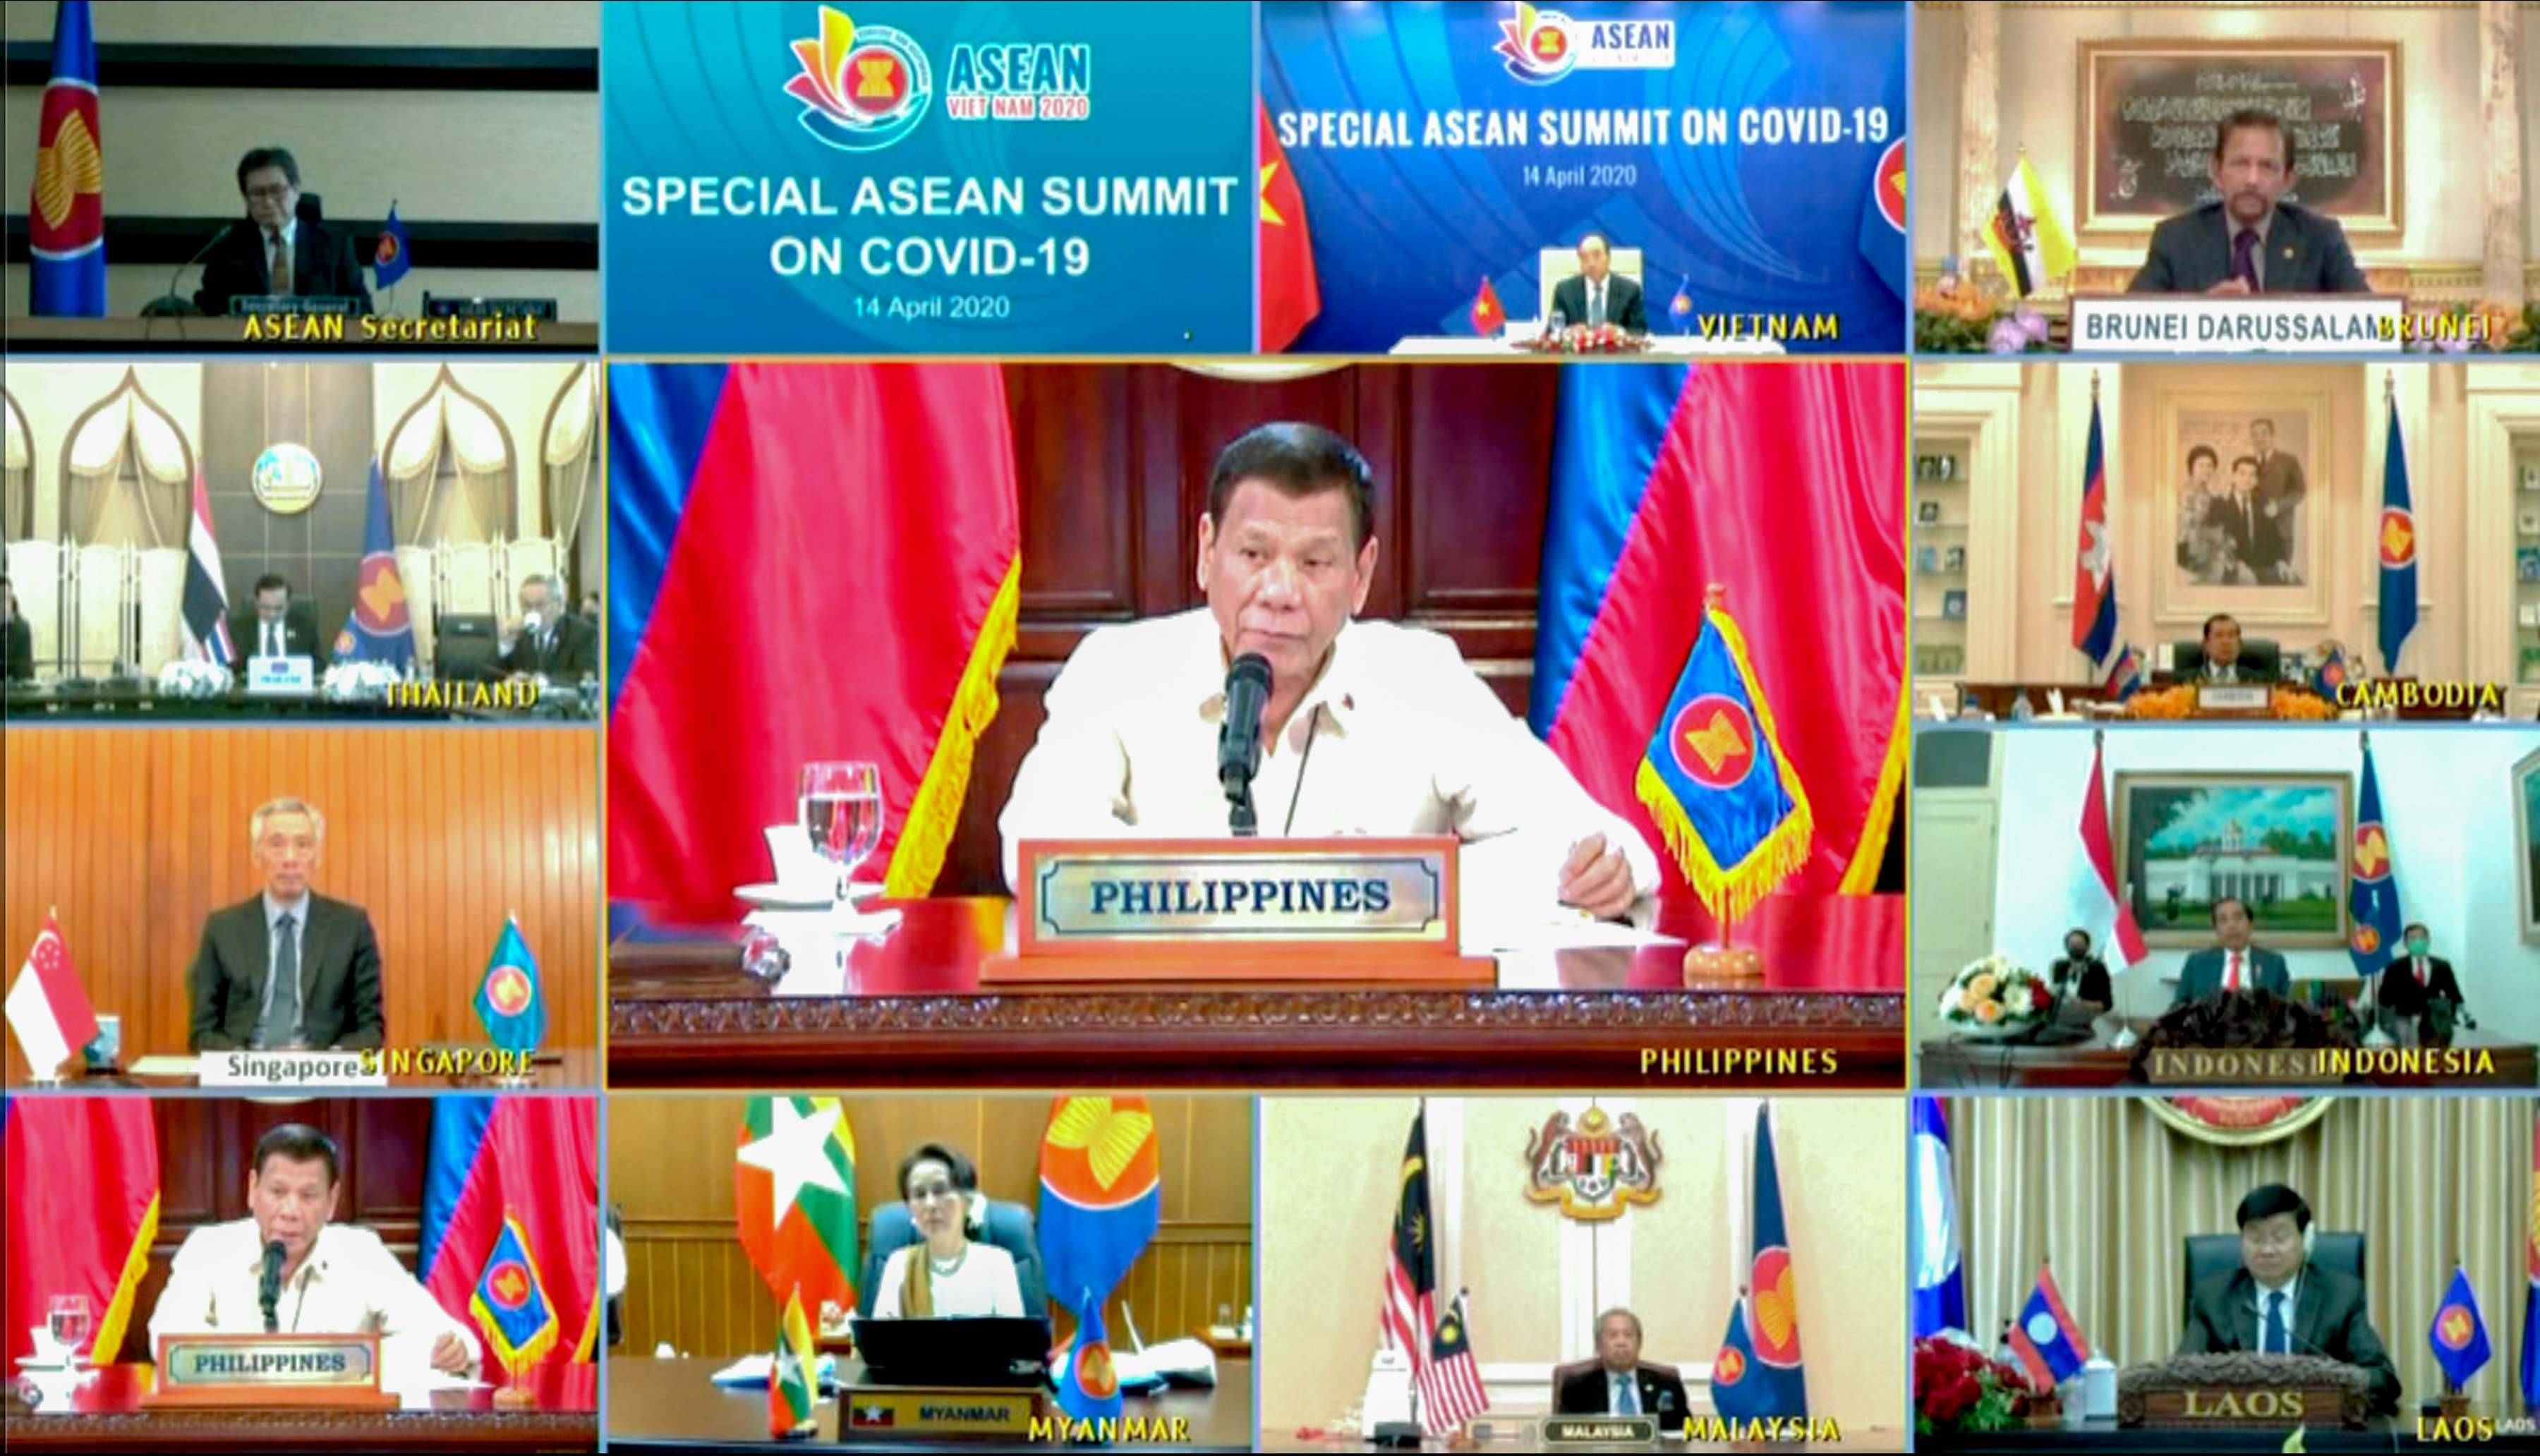 REGIONAL EFFORT. President Rodrigo Duterte gives his intervention as he joins other leaders from the Association of Southeast Asian Nations during the special ASEAN Summit on COVID-19 video conference on April 14, 2020. Malacañang photo  